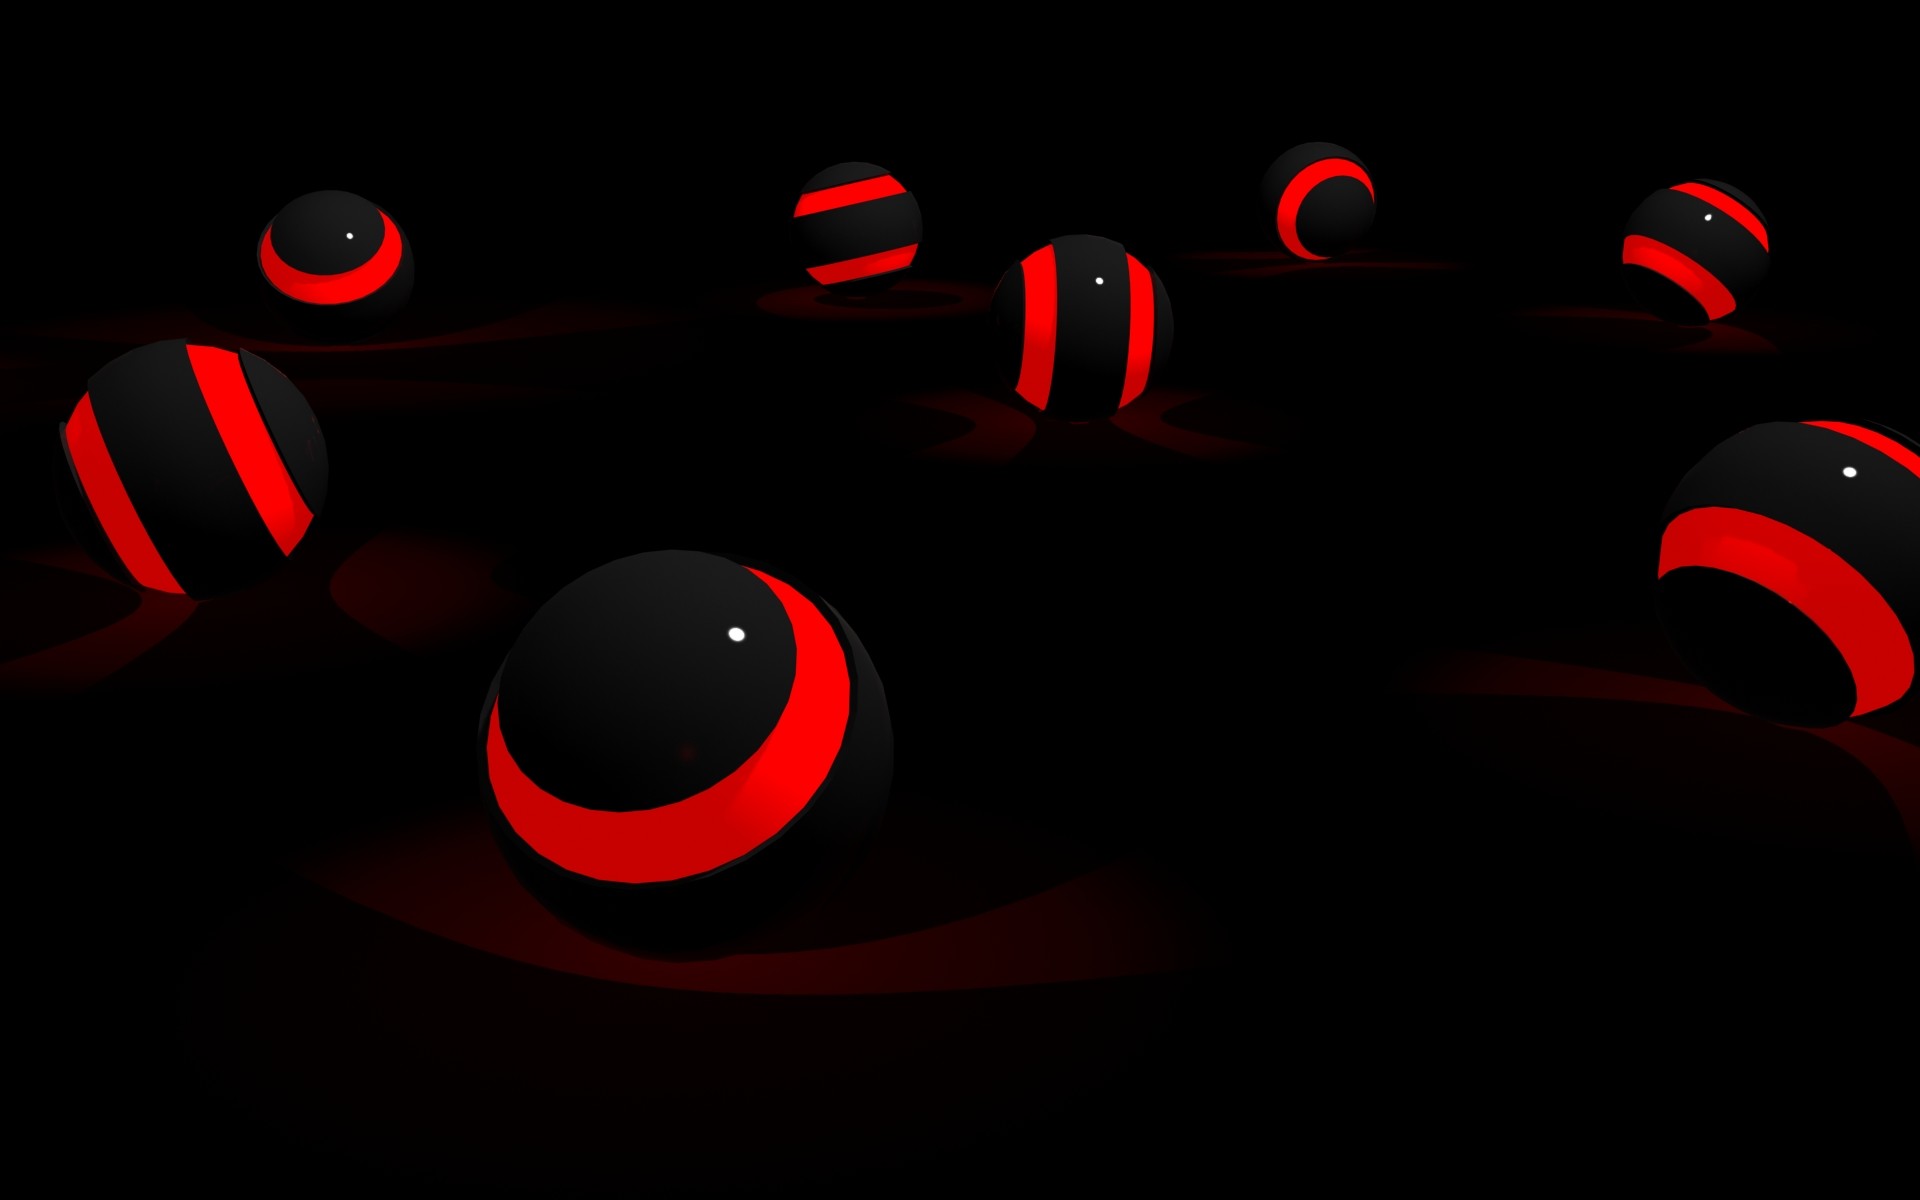 1920x1200 Cool Red And Black Backgrounds 4 Widescreen Wallpaper. Cool Red And Black  Backgrounds 4 Widescreen Wallpaper